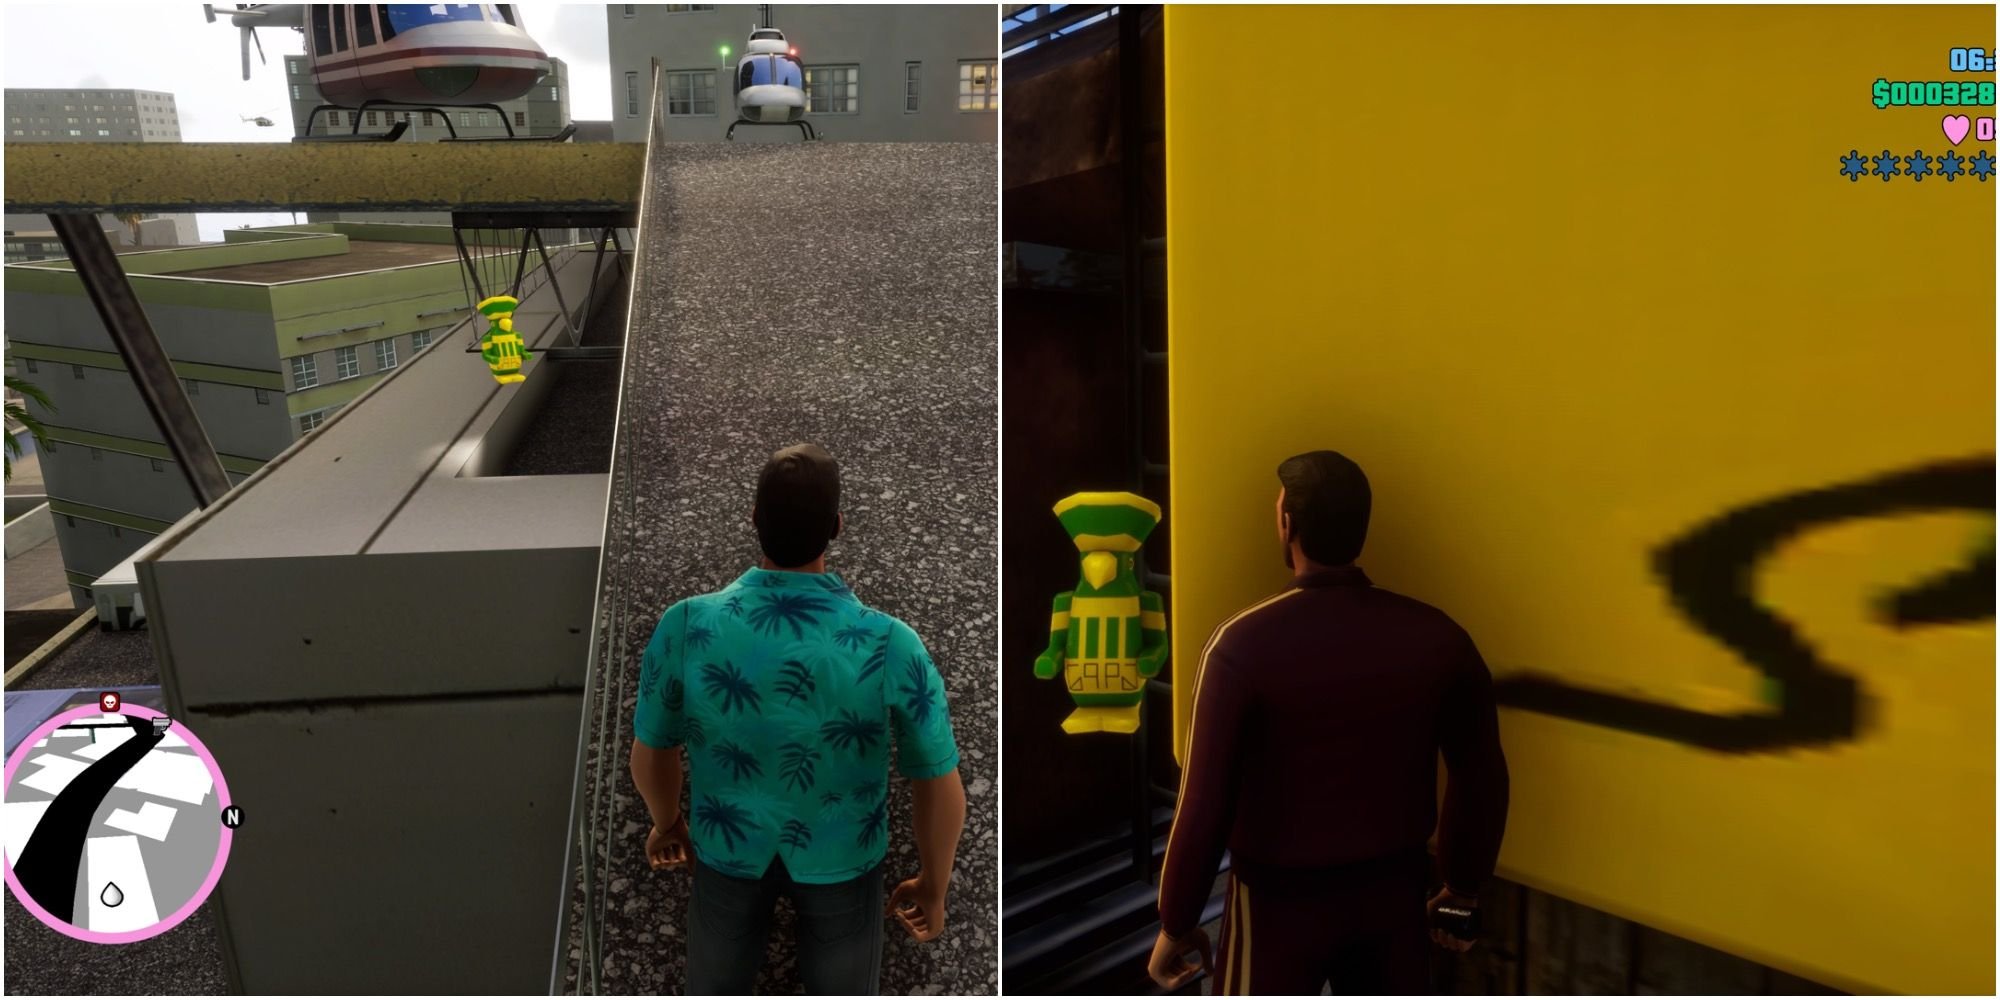 GTA: Vice City - All Hidden Package Locations On Second Island